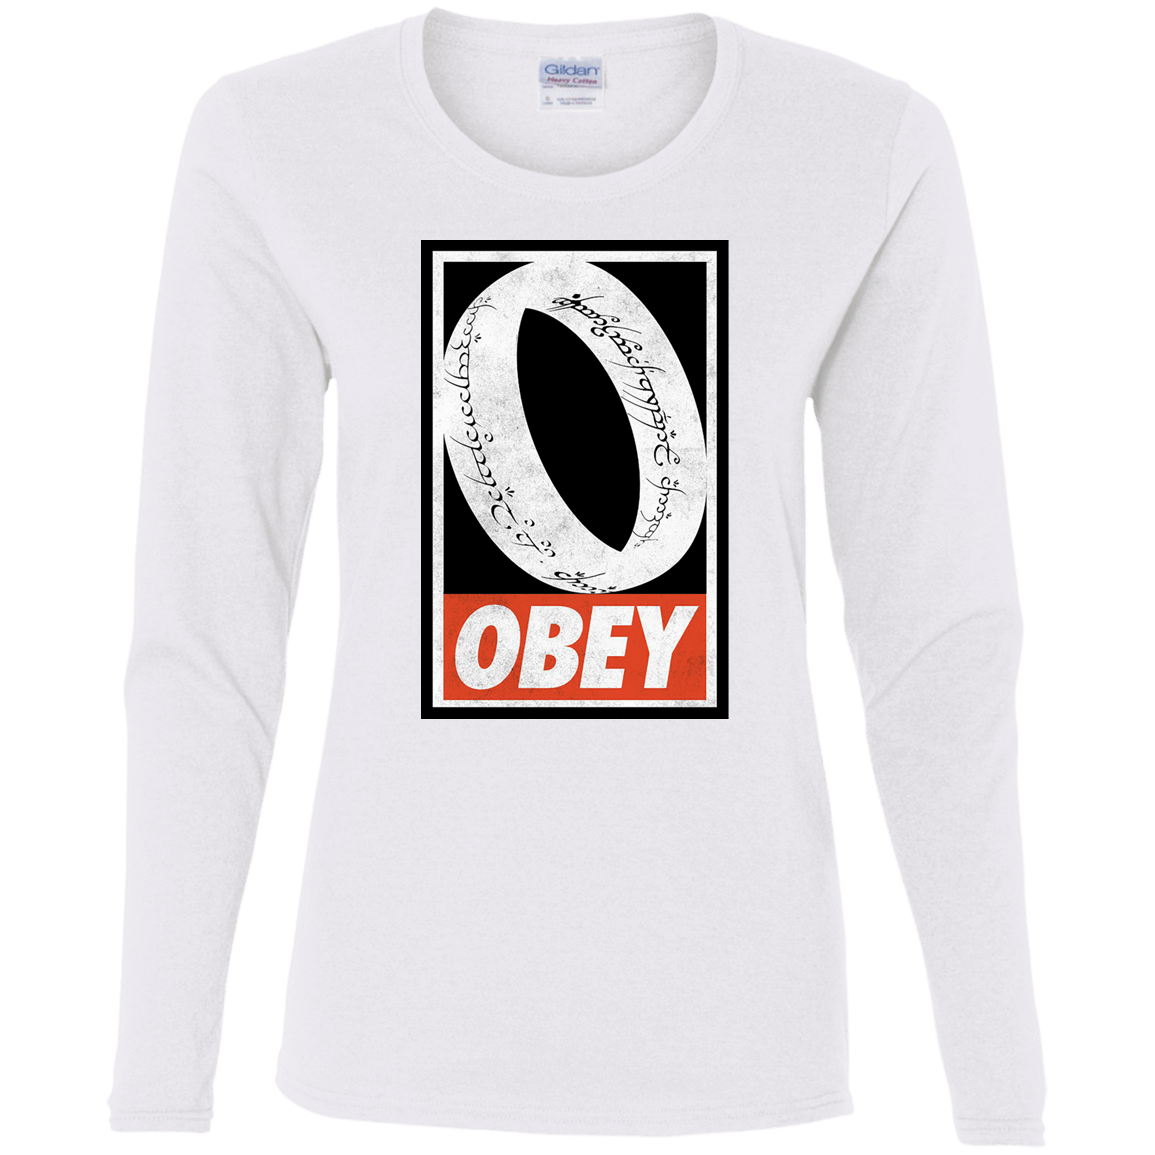 T-Shirts White / S Obey One Ring Women's Long Sleeve T-Shirt